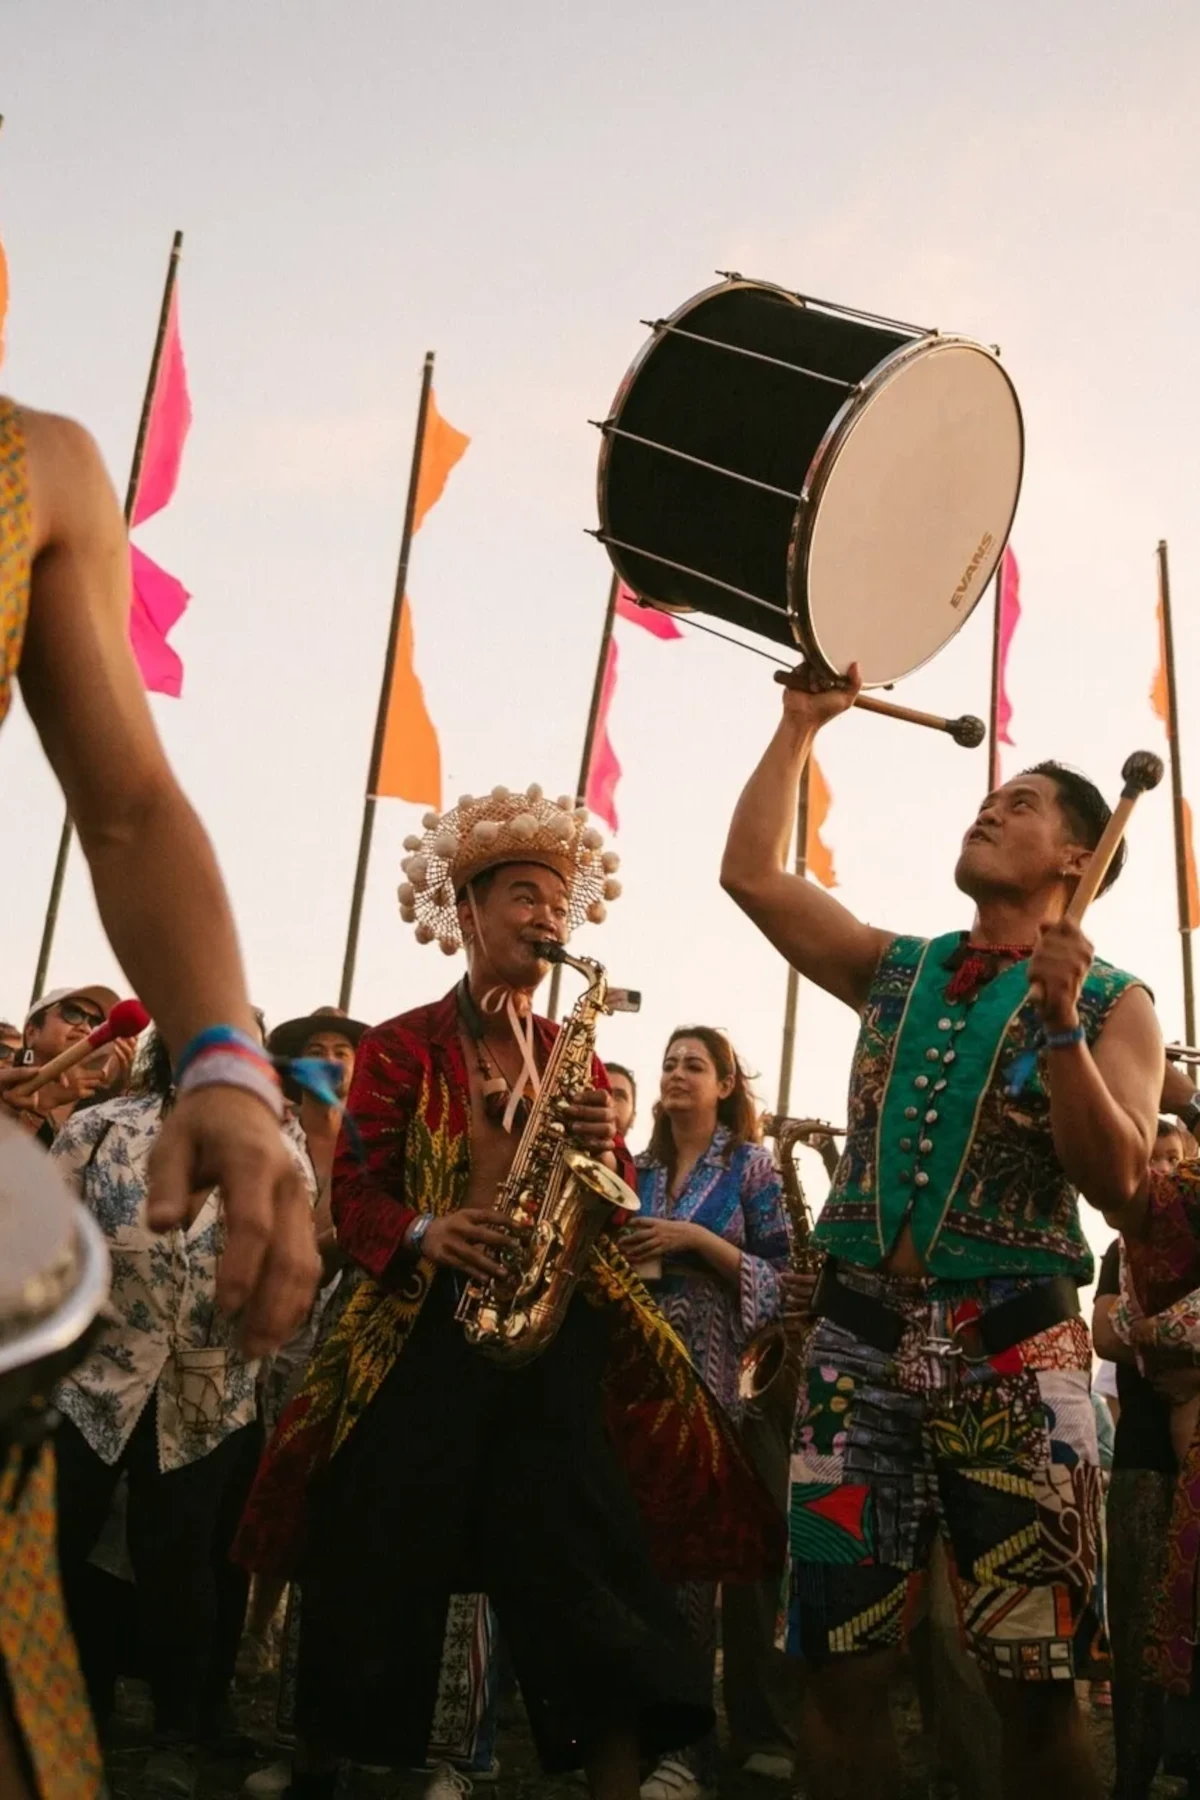 People playing instruments and enjoying the atmosphere at the Wonderfruit Music Festival in Thailand.